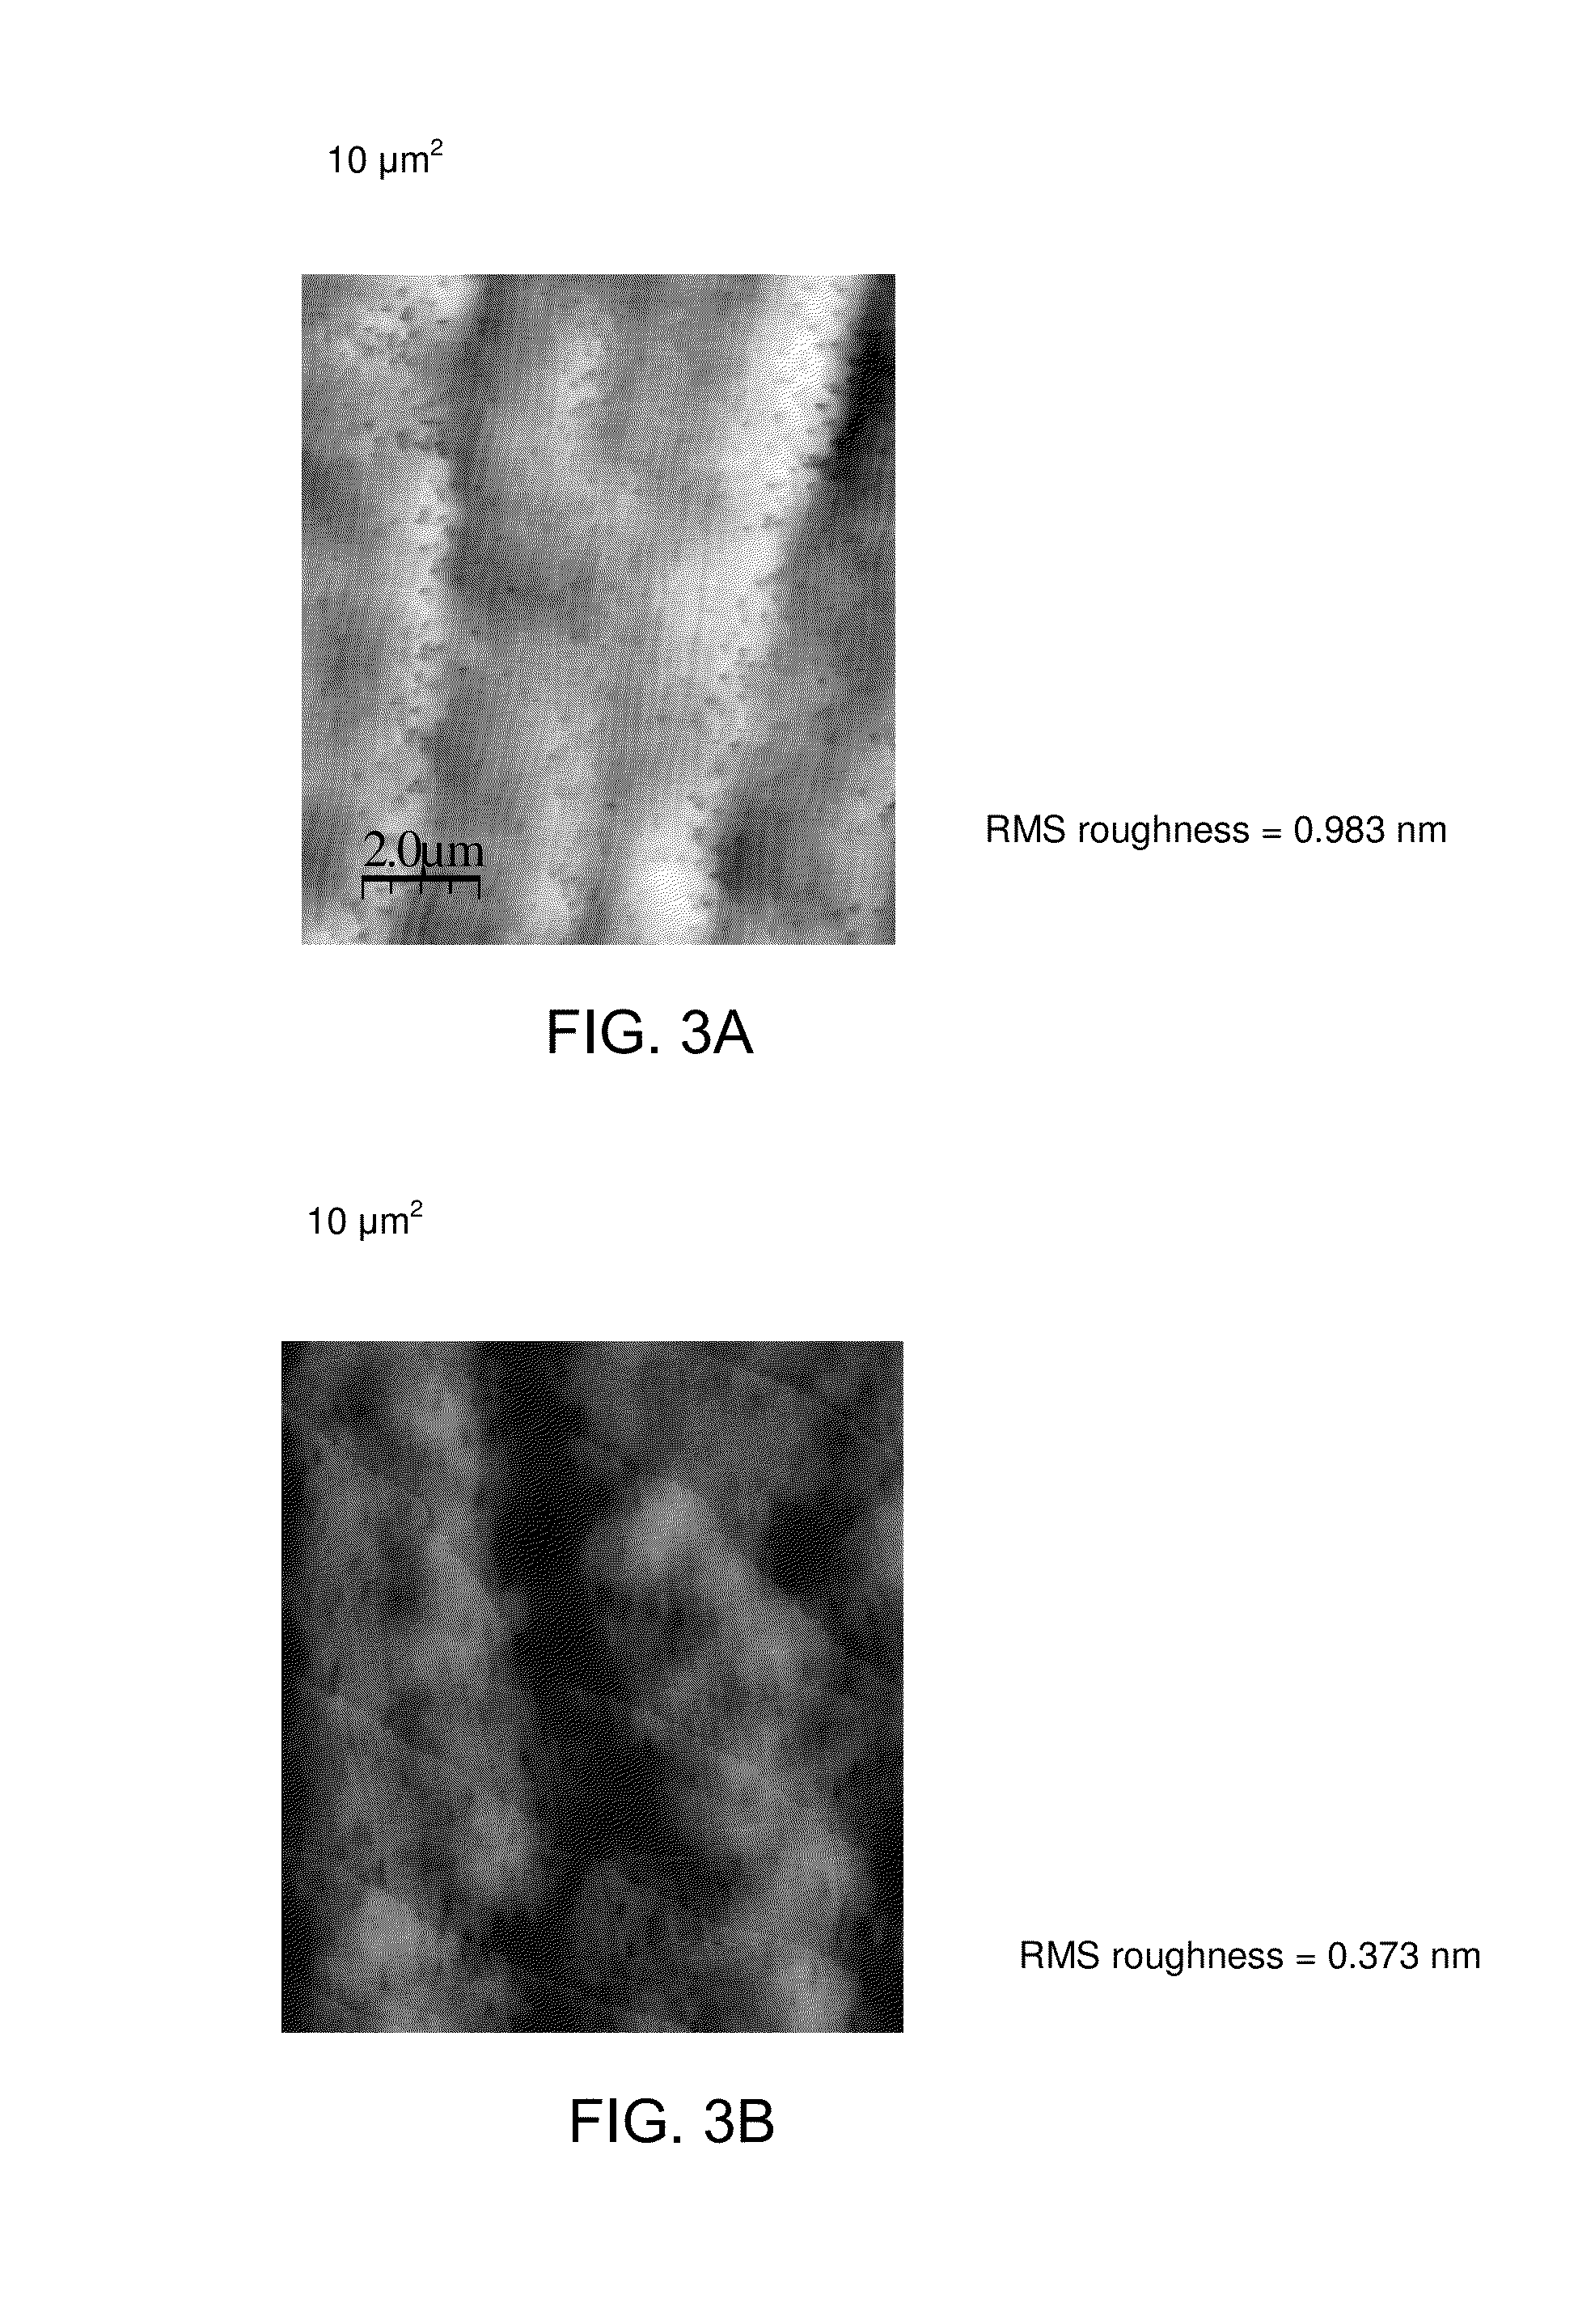 Method for Substrate Pretreatment To Achieve High-Quality III-Nitride Epitaxy